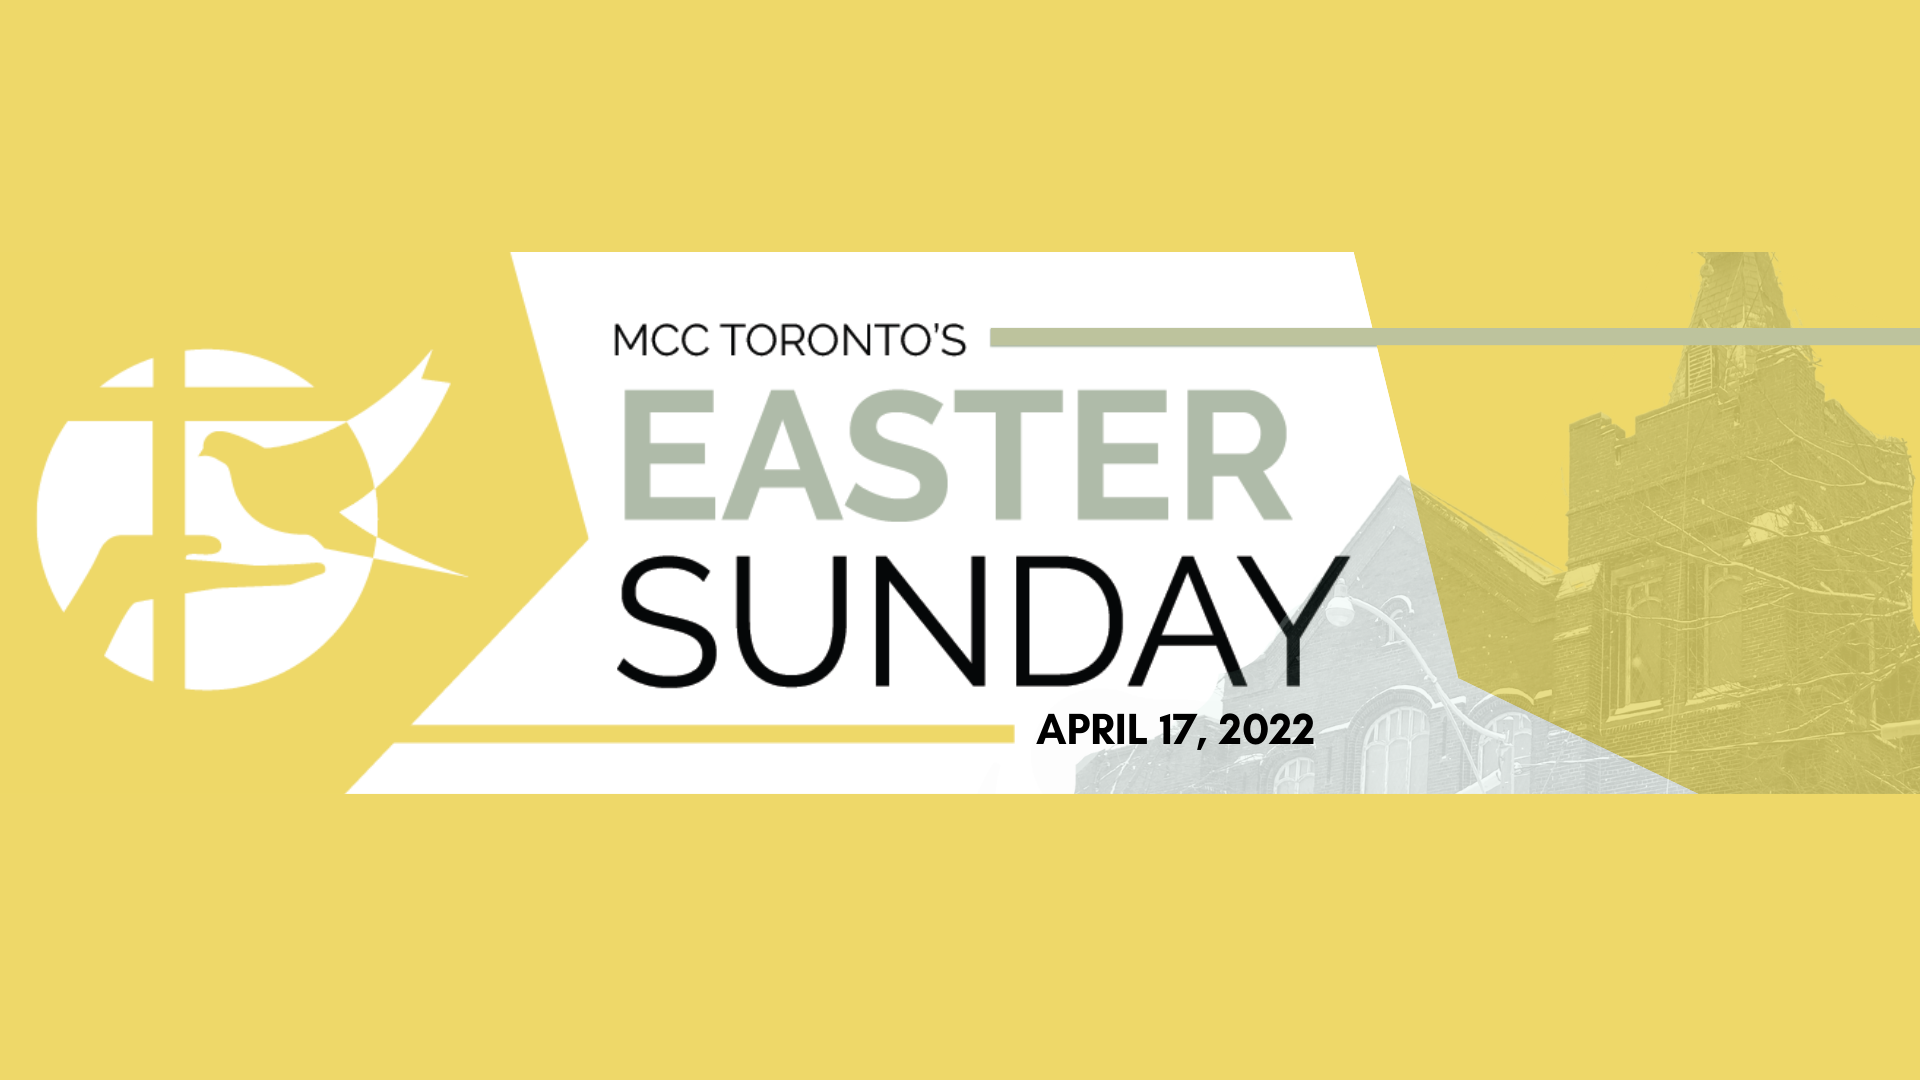 Picture of MCC Toronto's logo and picture of MCC Toronto's building over a yellow background with text saying: "MCC Toronto 's Easter Sunday April 17, 2022